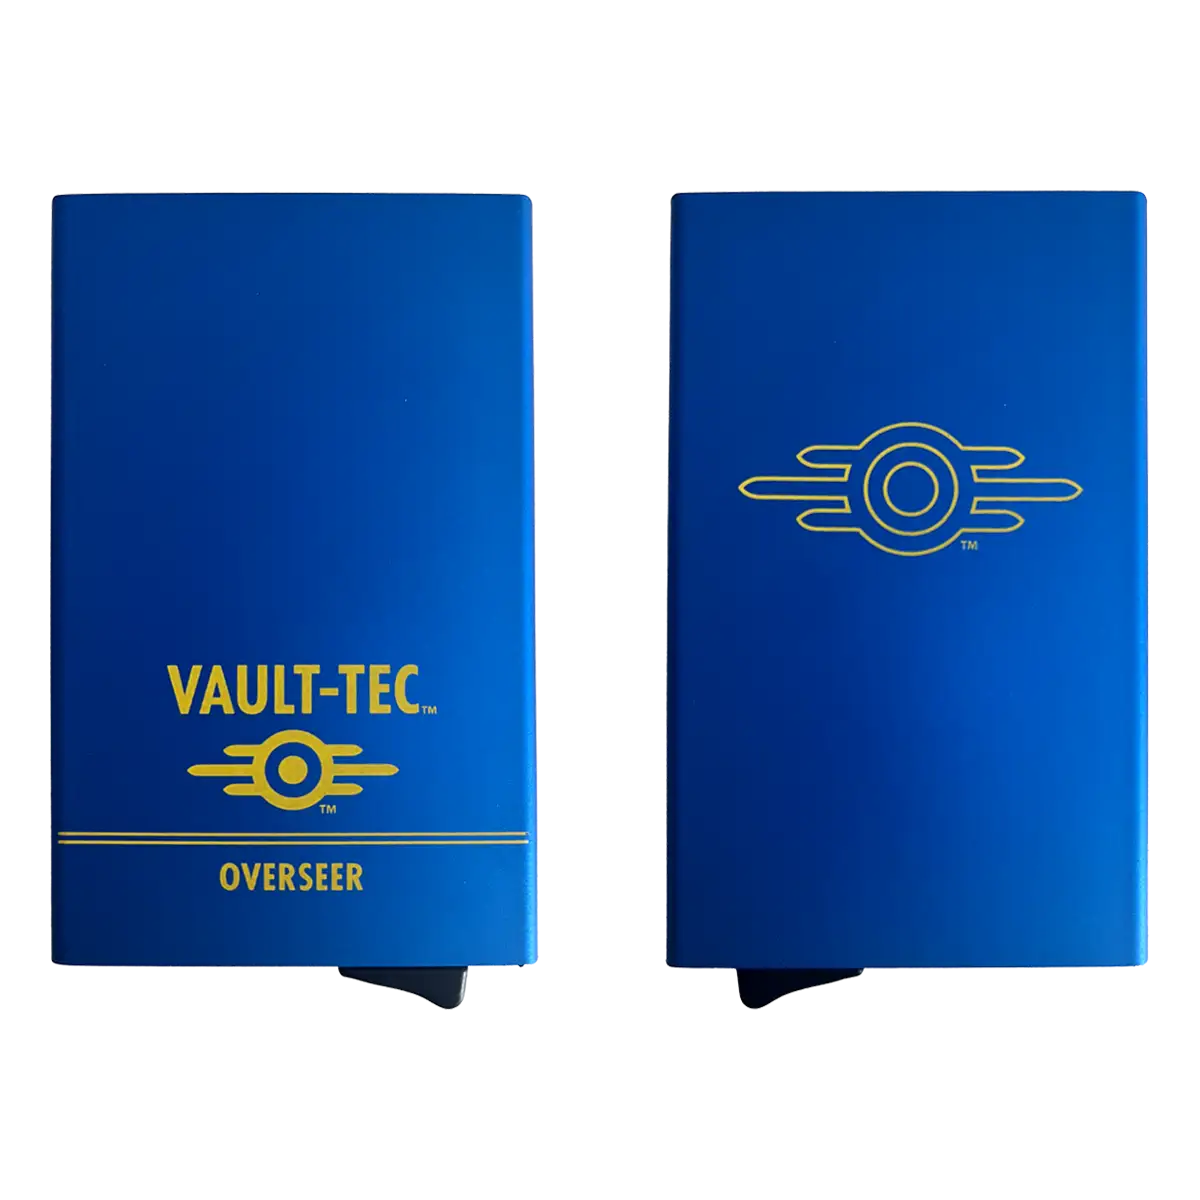 Fallout Credit Card Holder "Overseer" Cover